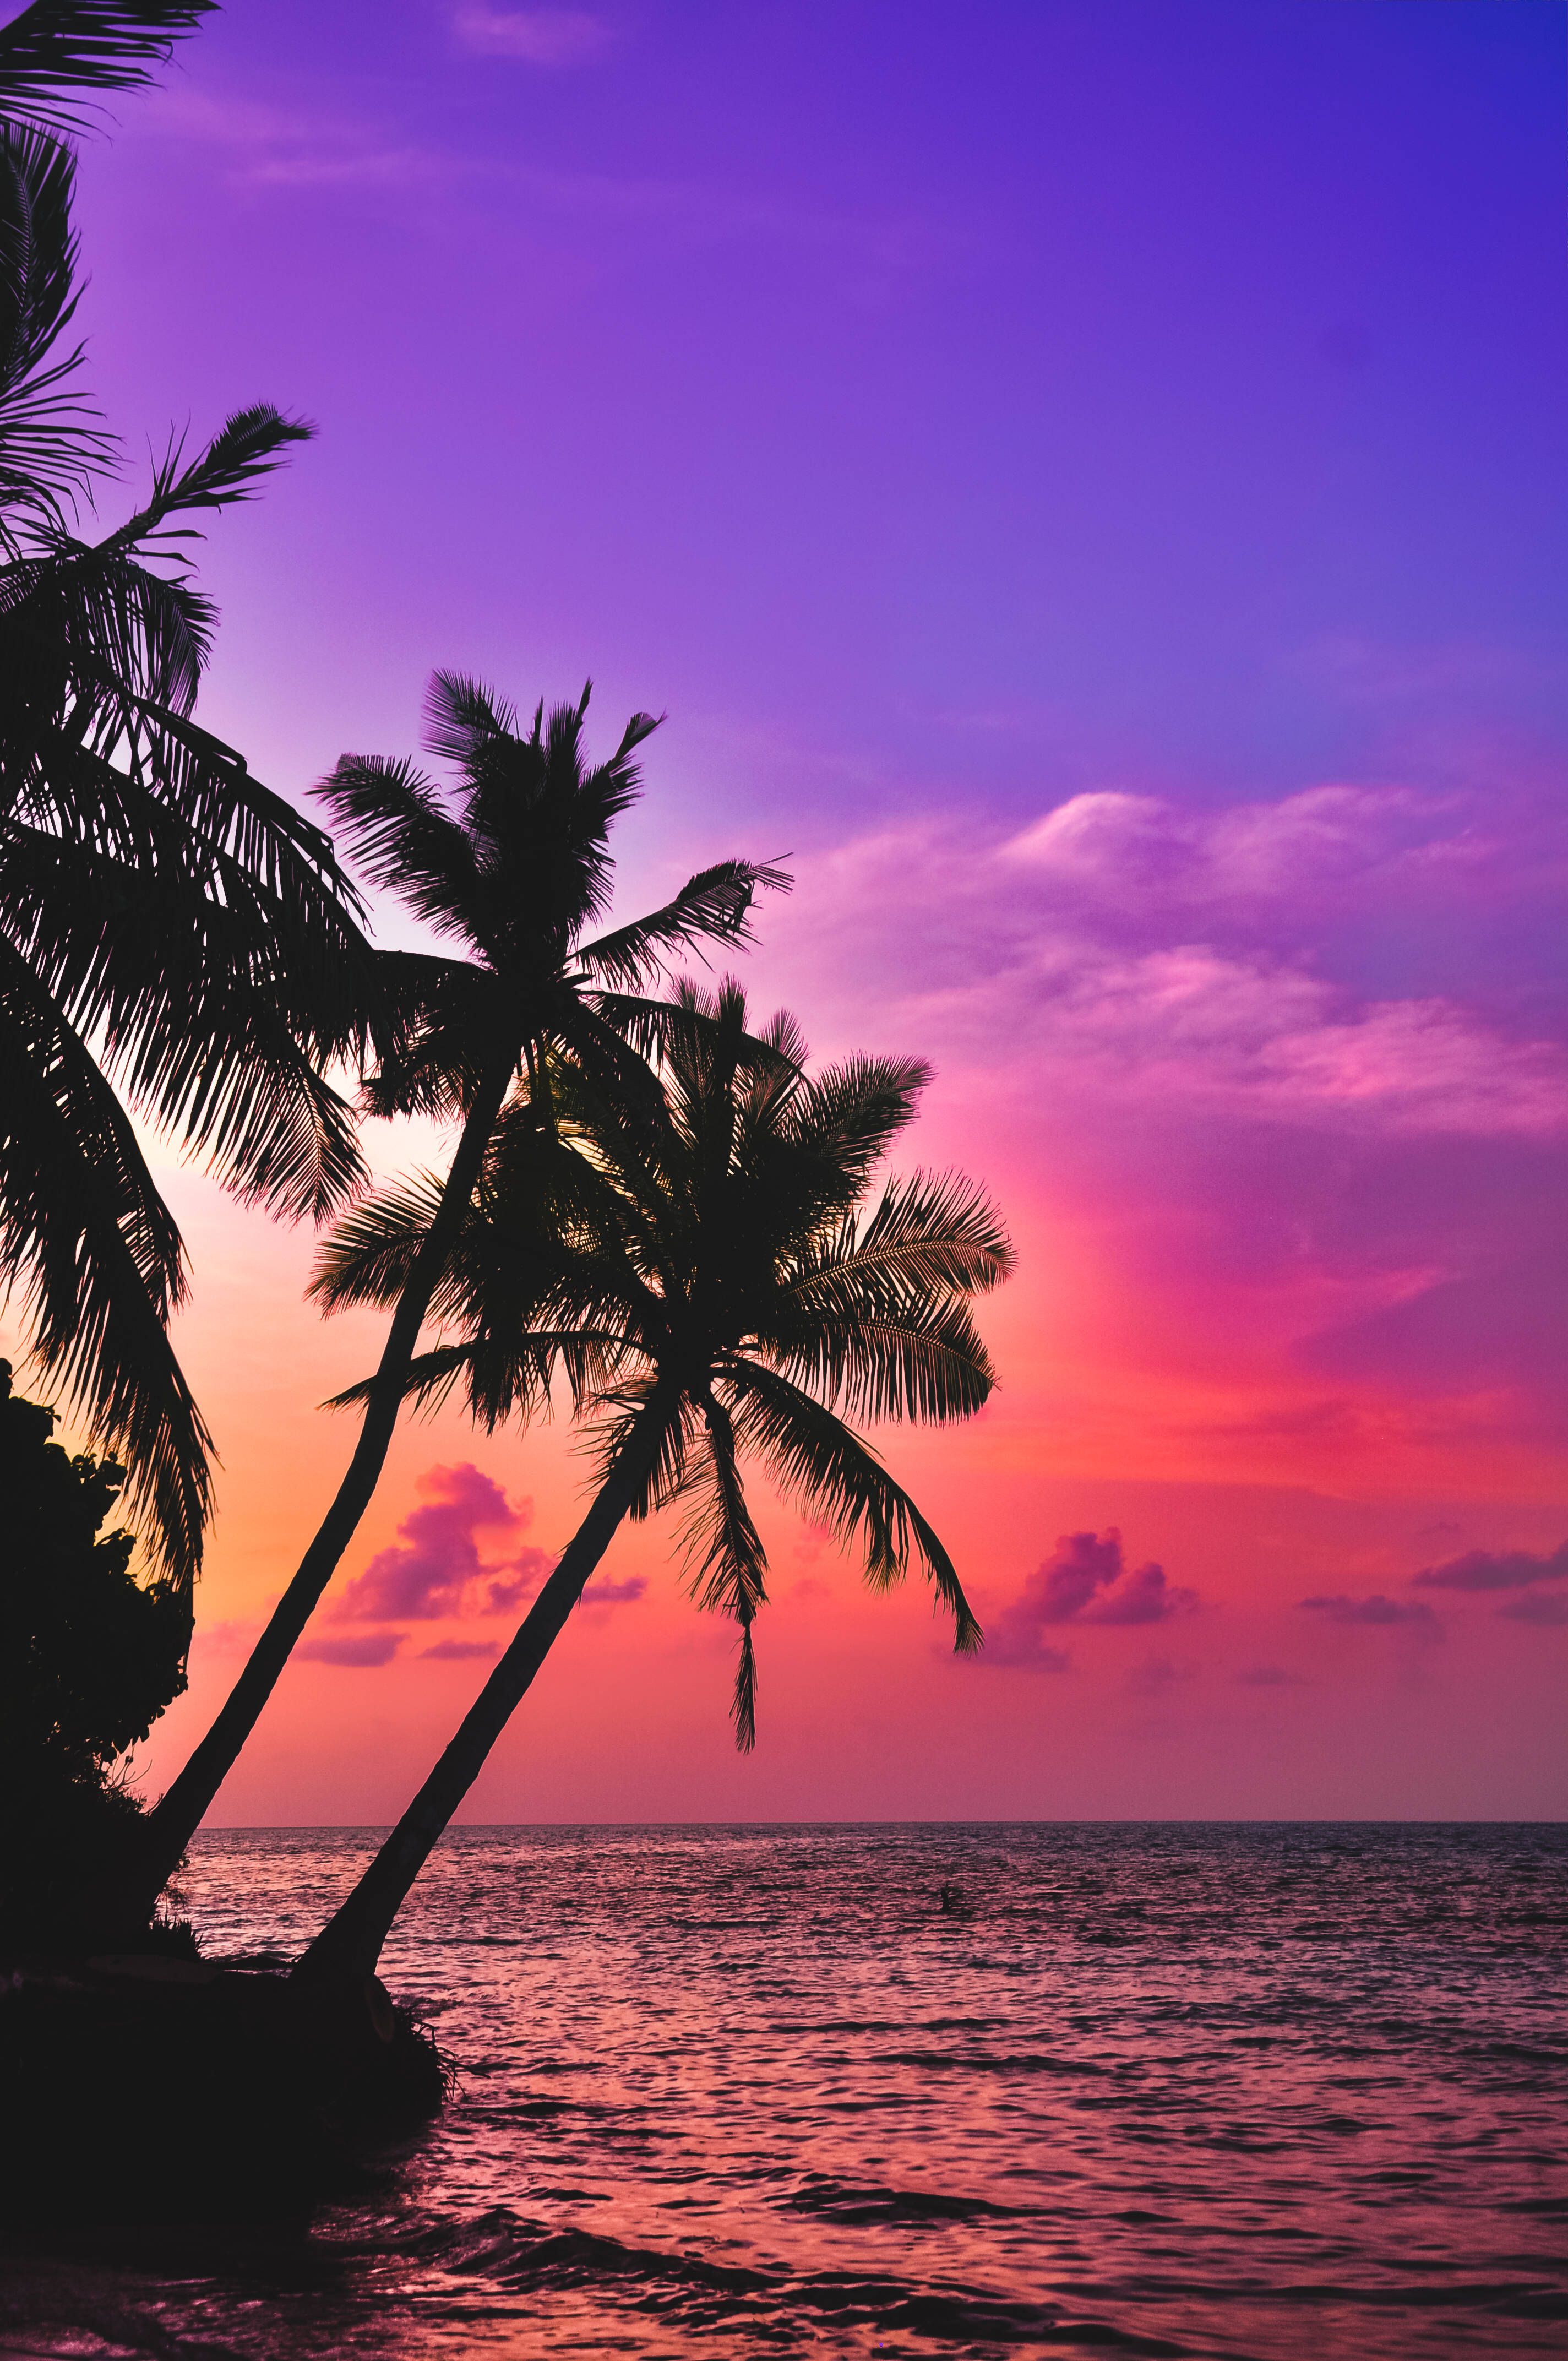 A silhouette of palm trees on a beach with a purple and orange sunset in the background. - Summer, sunset, coconut, tropical